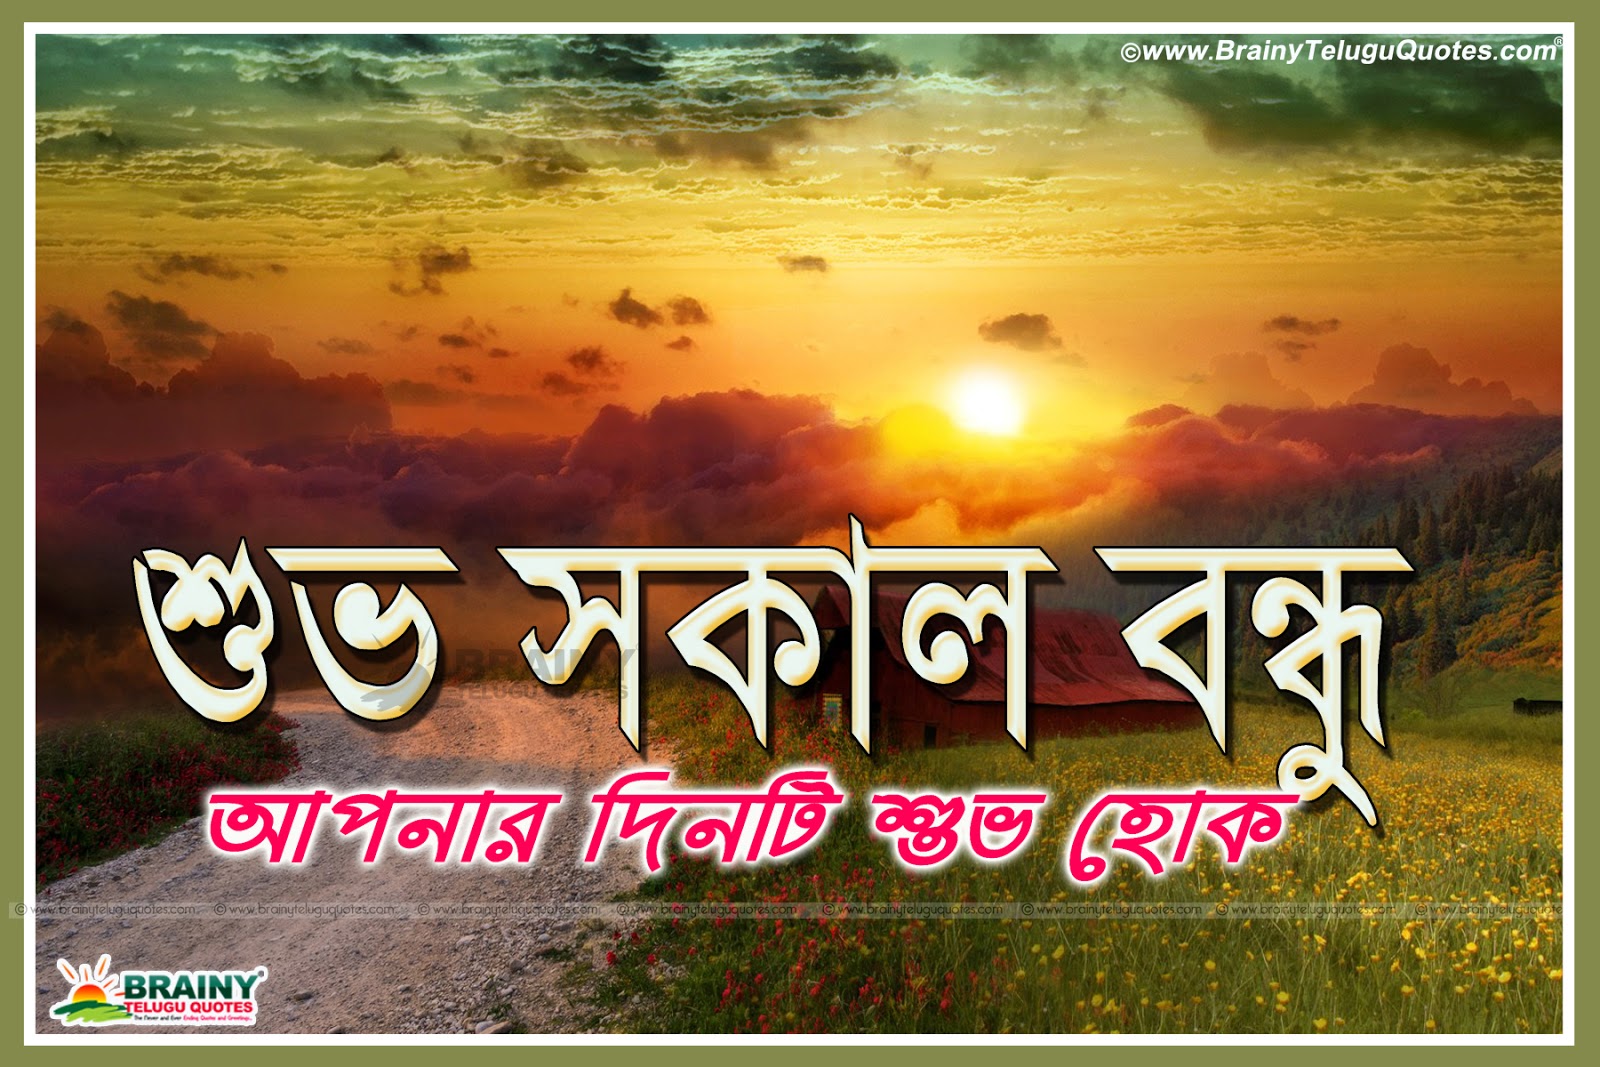 New Bengali Ability Quotations And Messages Online, - Good Morning , HD Wallpaper & Backgrounds